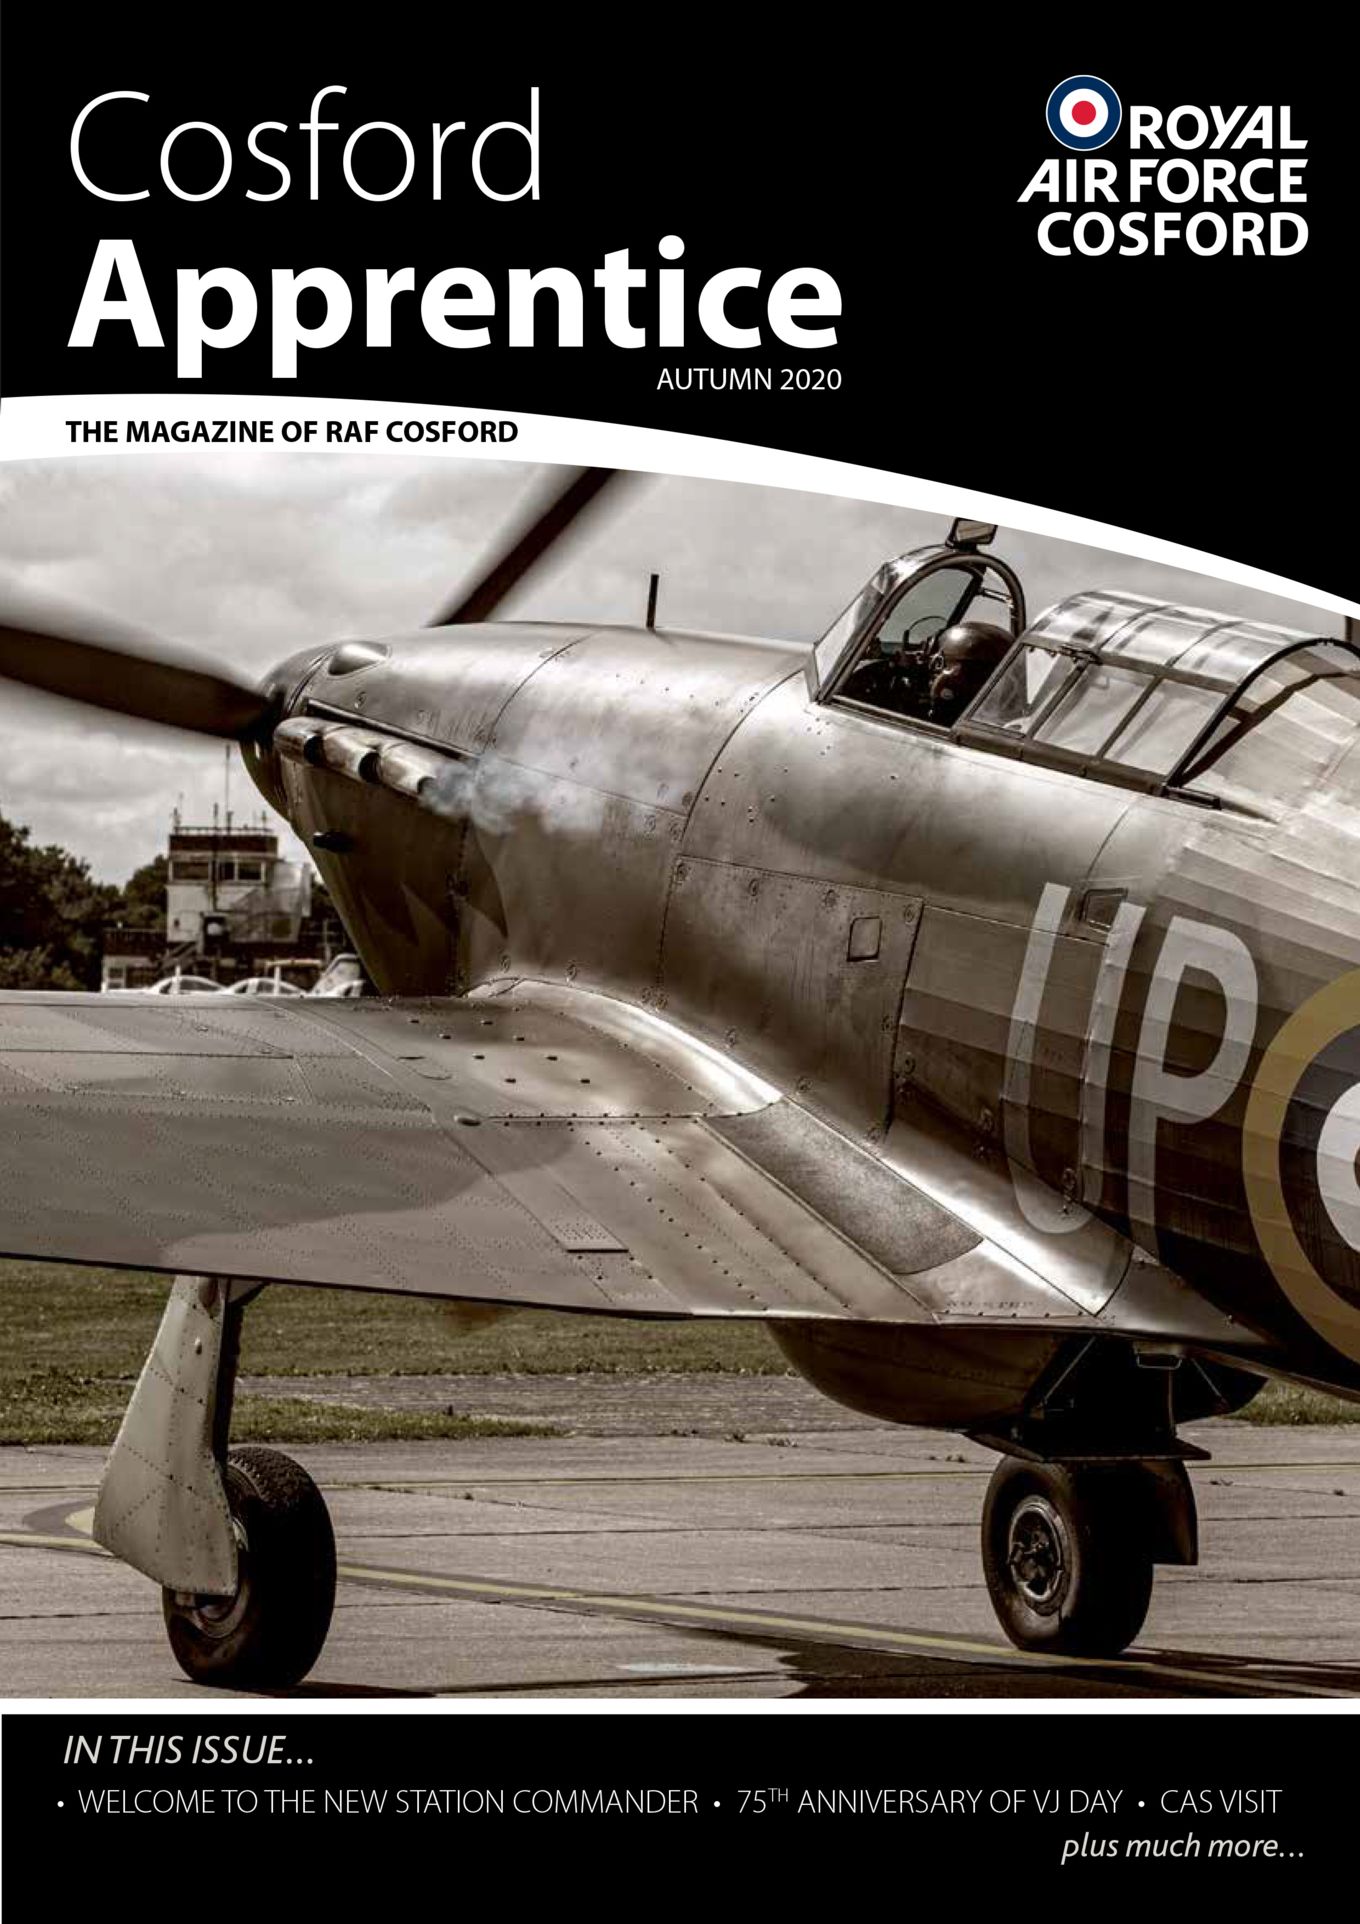 Picture of the front cover of the Apprentice magazine. - picture is a spitfire aircraft